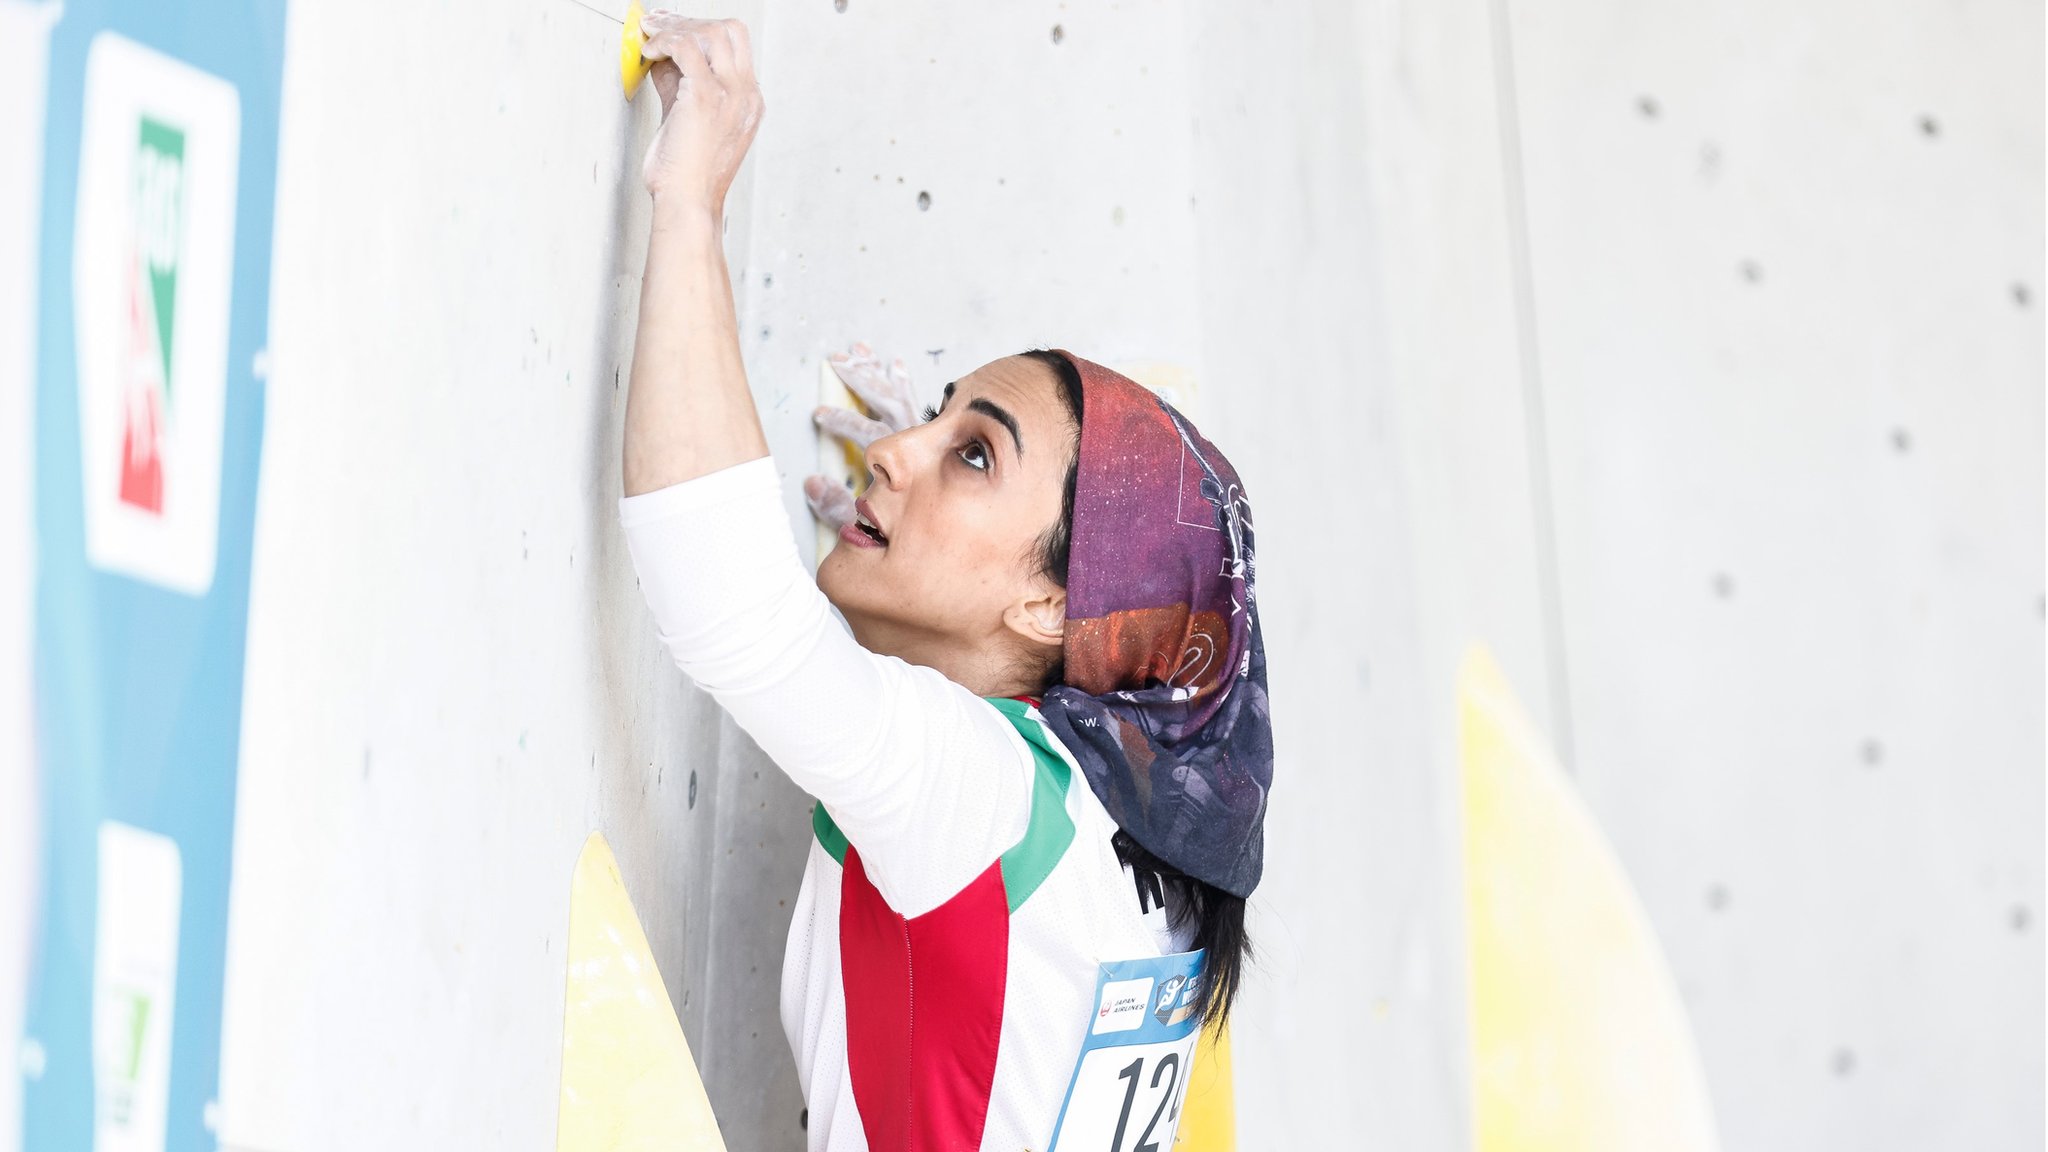 Irans Elnaz Rekabi competes in climbing return after headscarf controversy